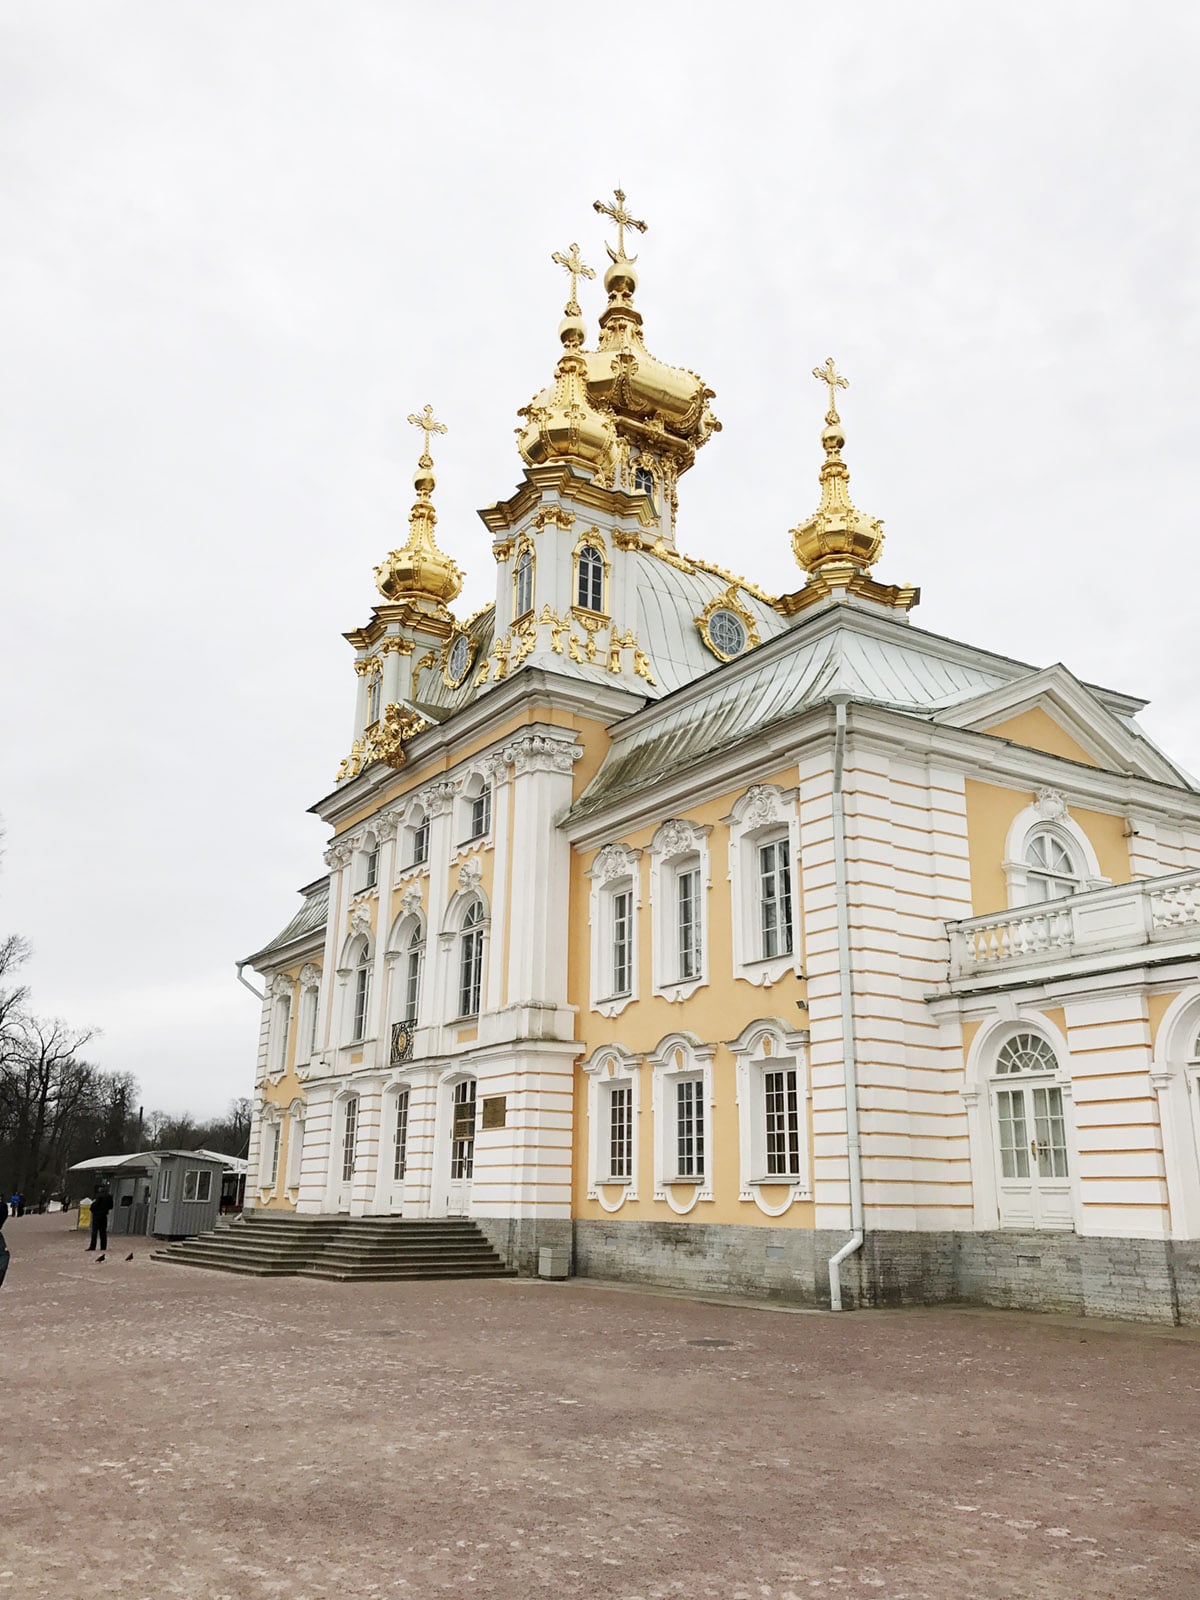 peterhof palace in russia | travel diary on coco kelley